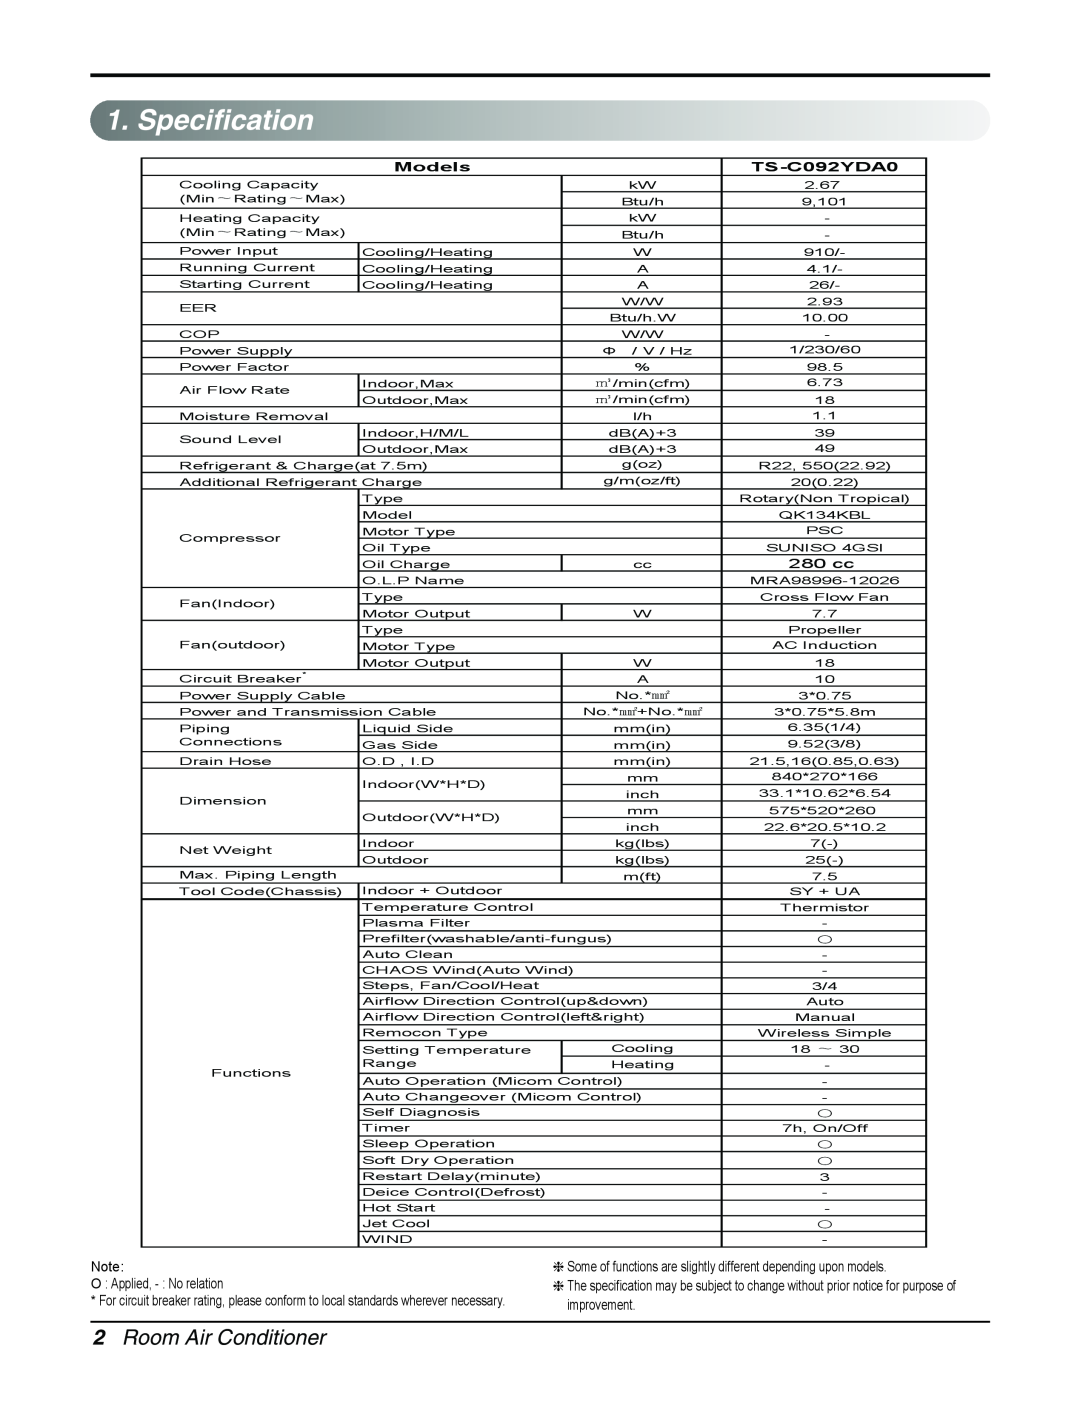 LG Electronics TS-C092YDA0 manual Specification, Room Air Conditioner, Models, 280 cc 